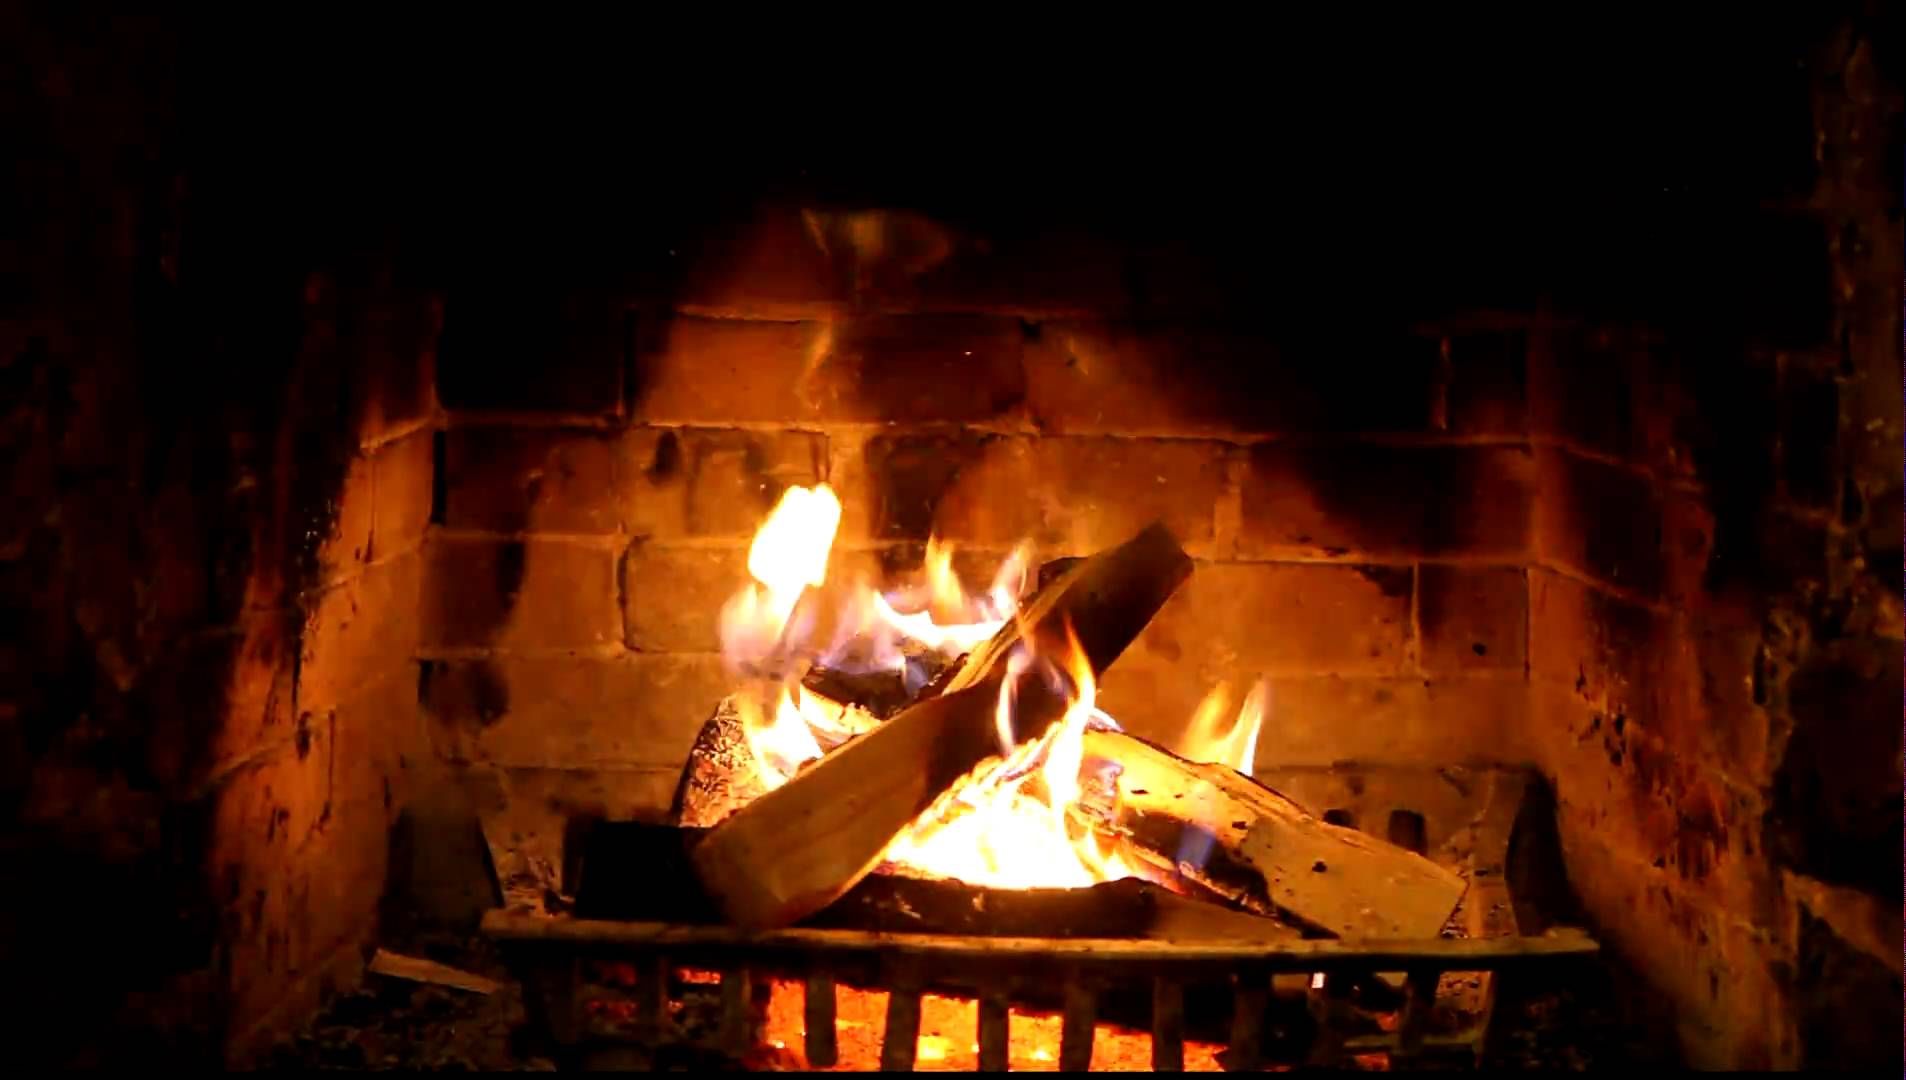 Fireplace Music New Crackling Fireplace In High Def 1080p